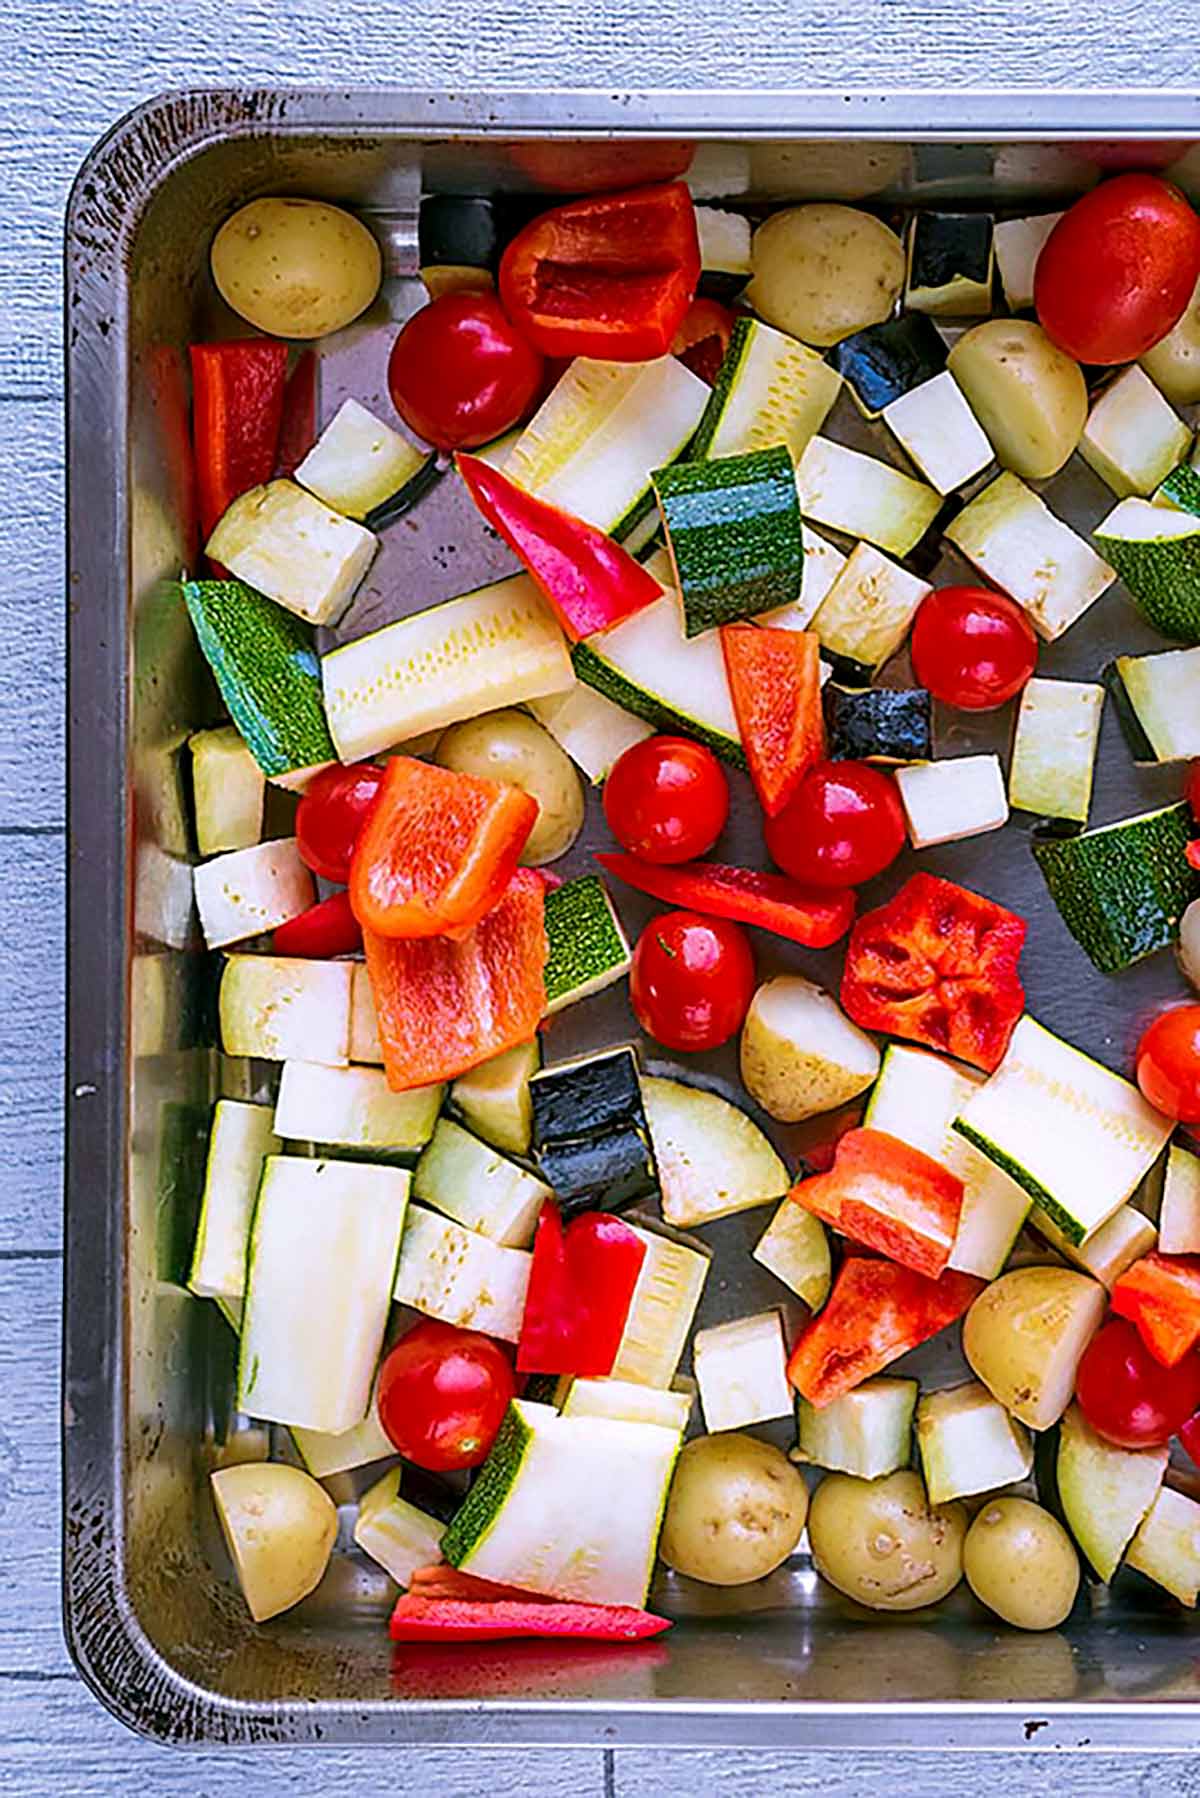 Chopped vegetables in a roasting tin.